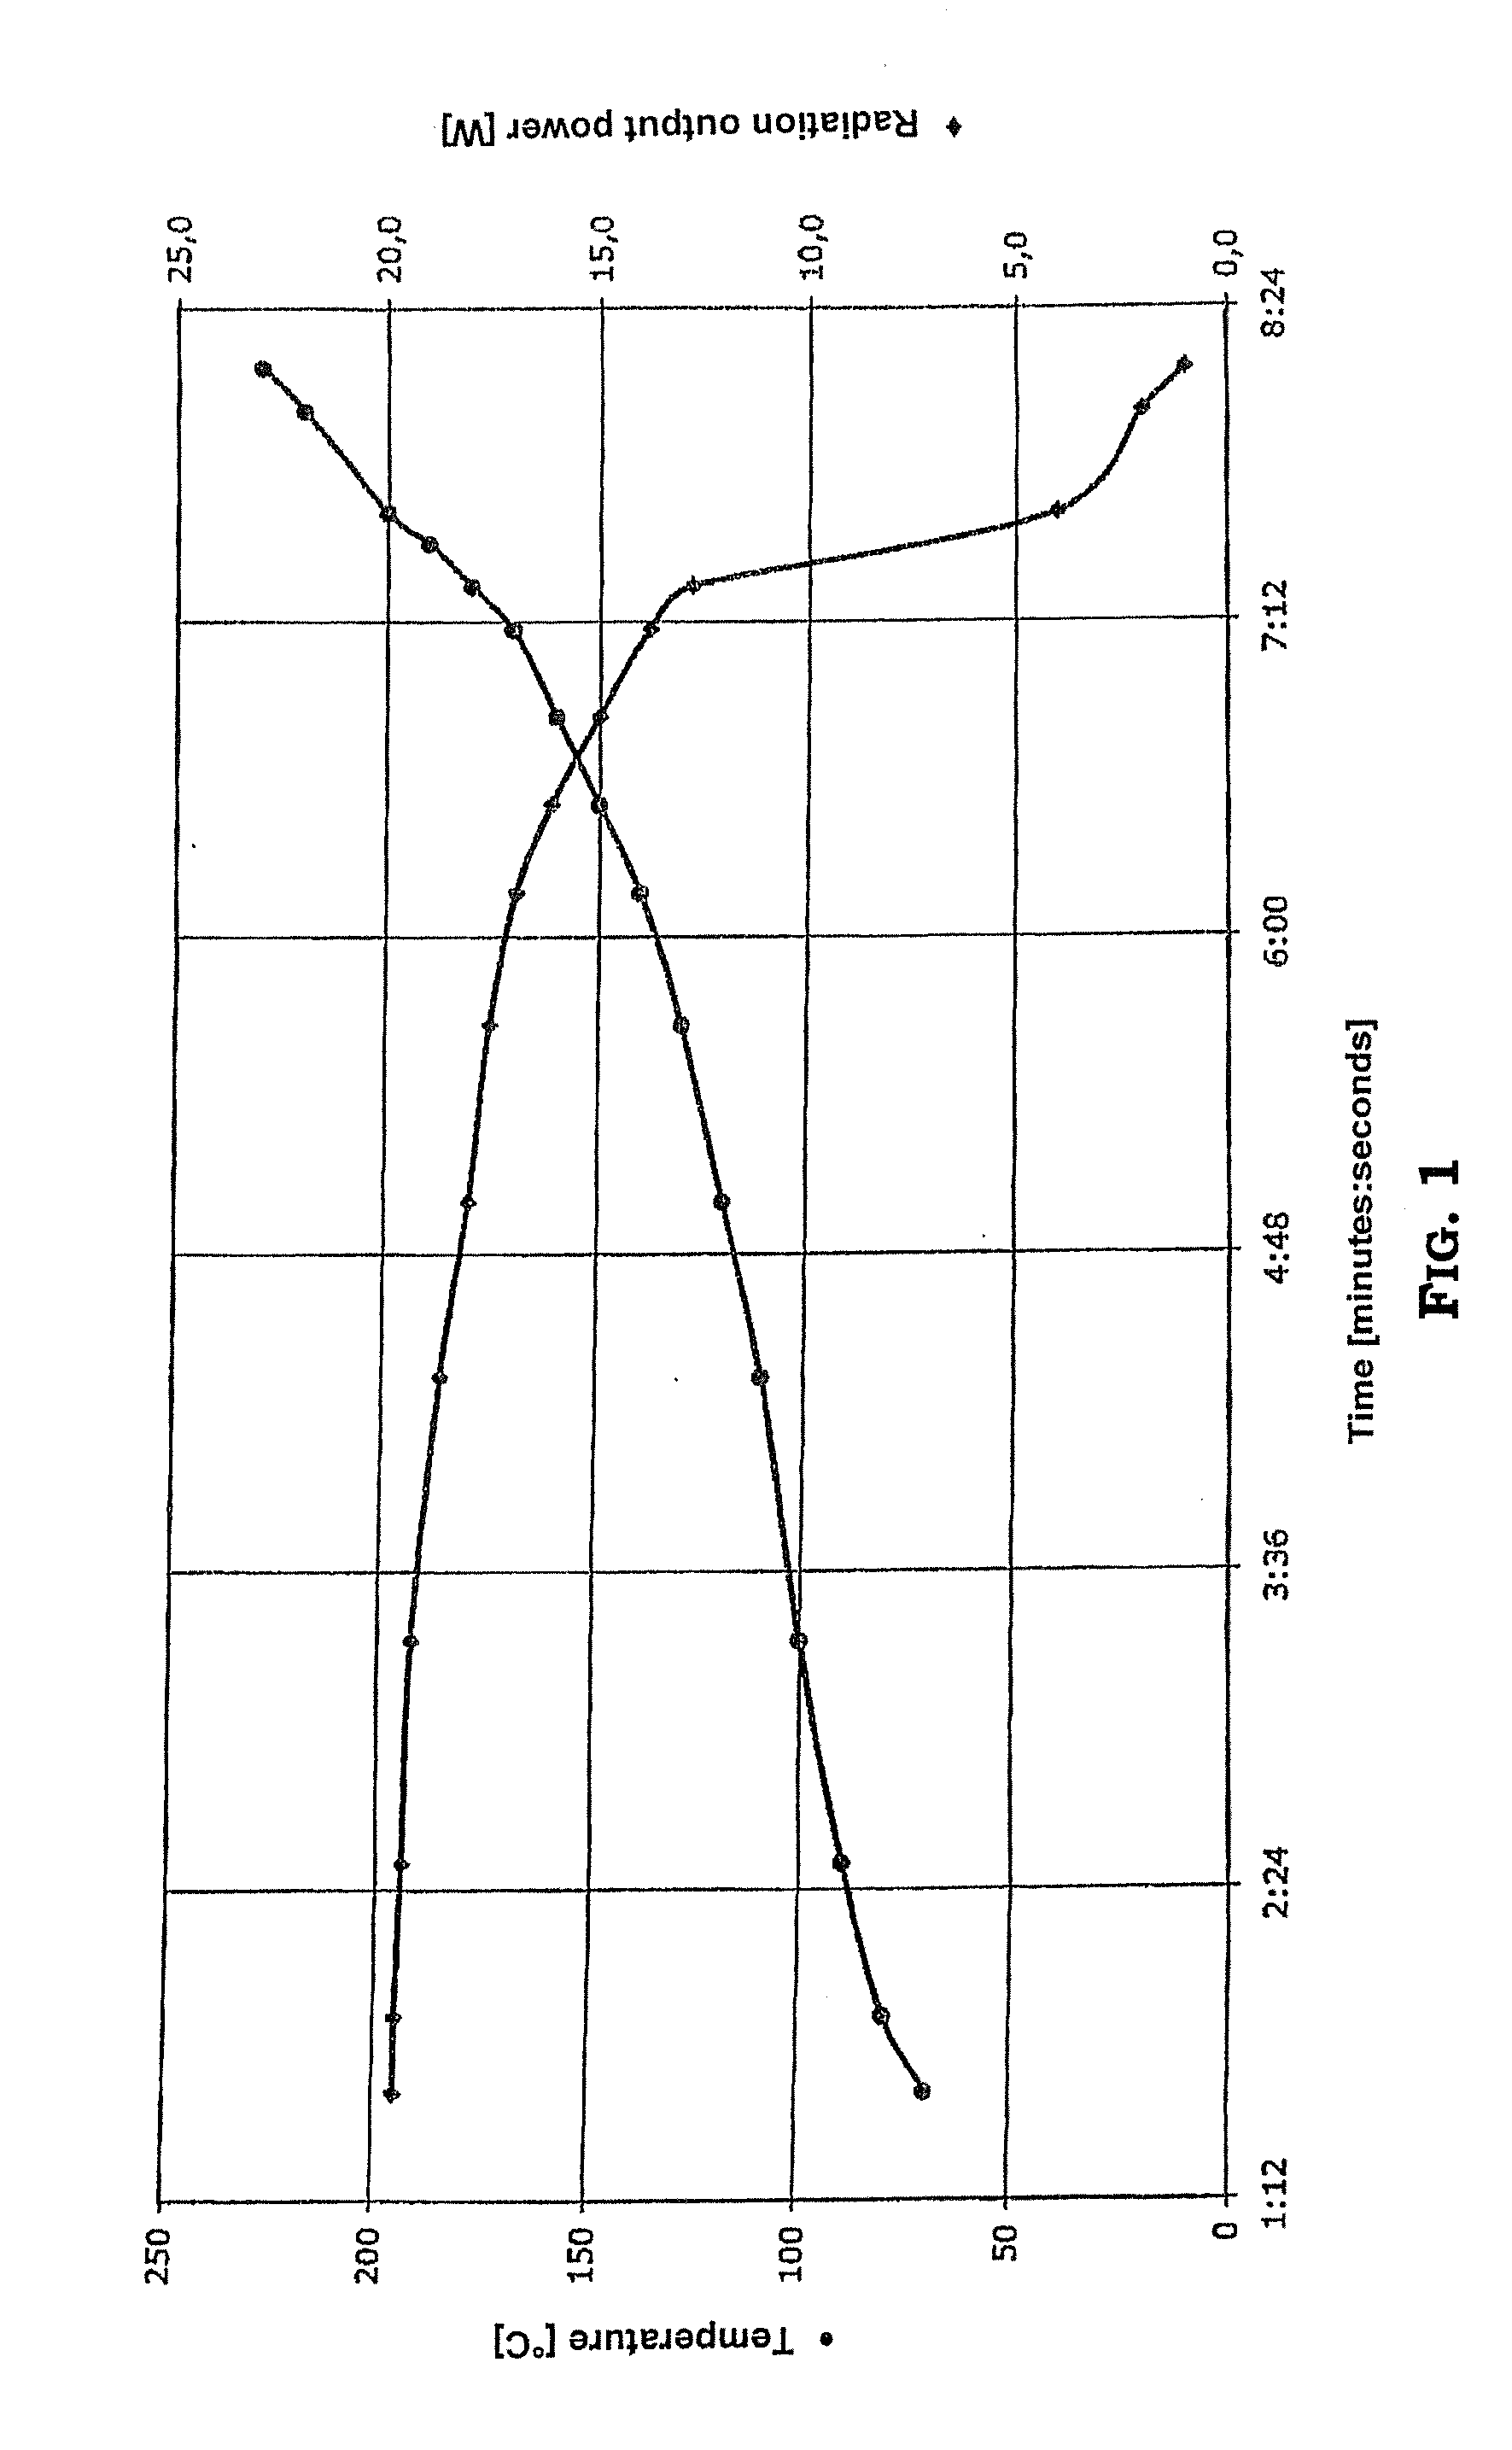 Temperature monitoring of a light guide in an illumination apparatus